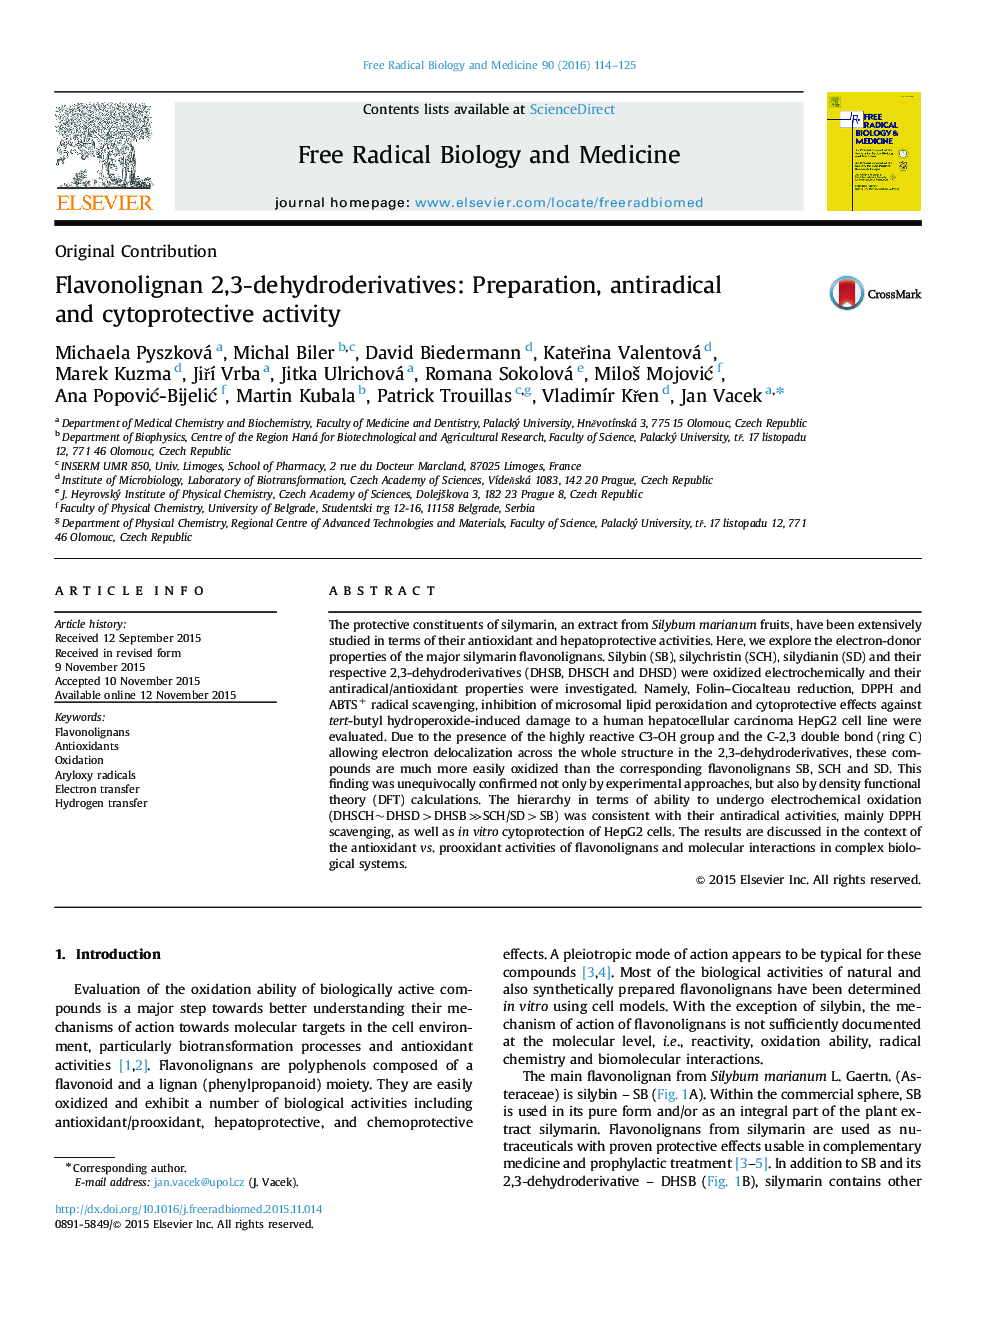 Flavonolignan 2,3-dehydroderivatives: Preparation, antiradical and cytoprotective activity